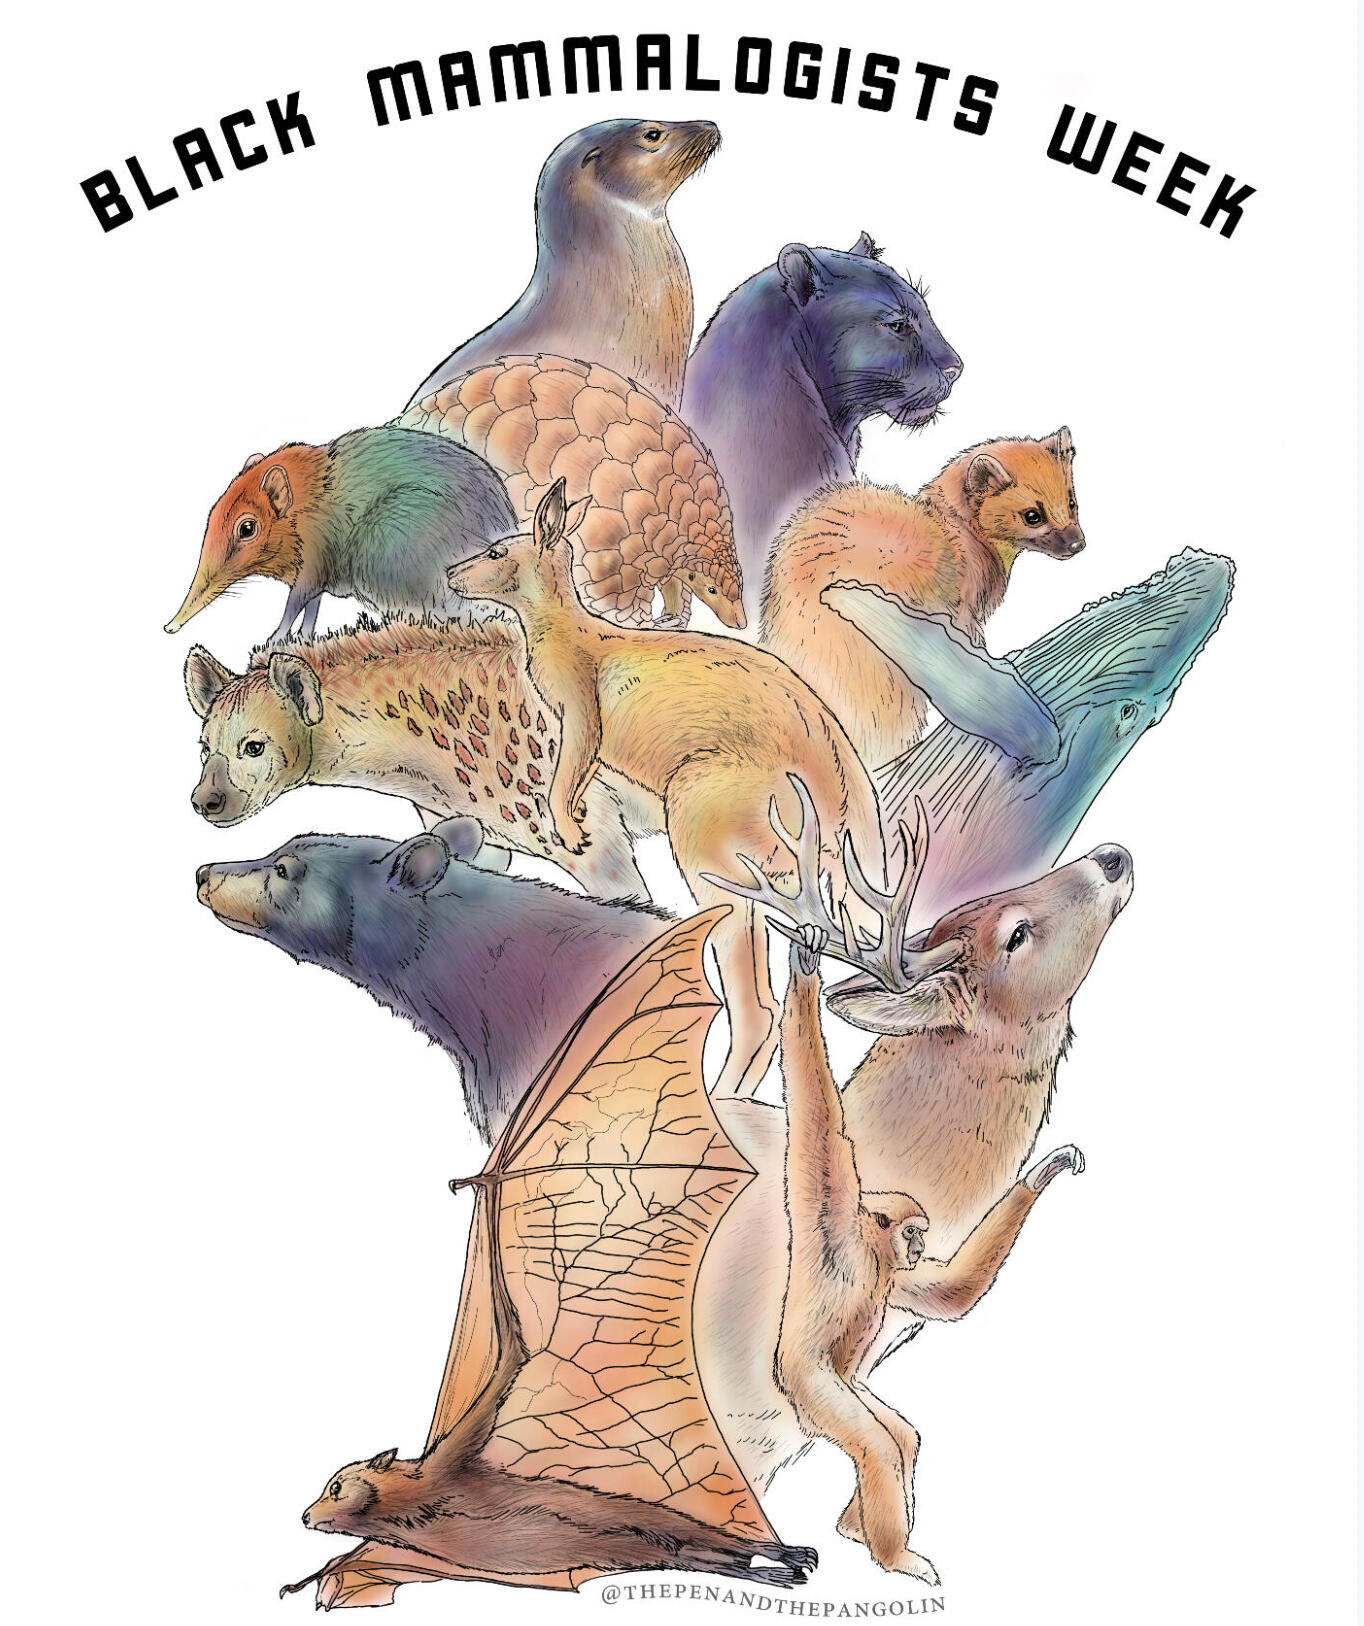 Animal logo for Black Mammalogists Week, which runs 9/13-19